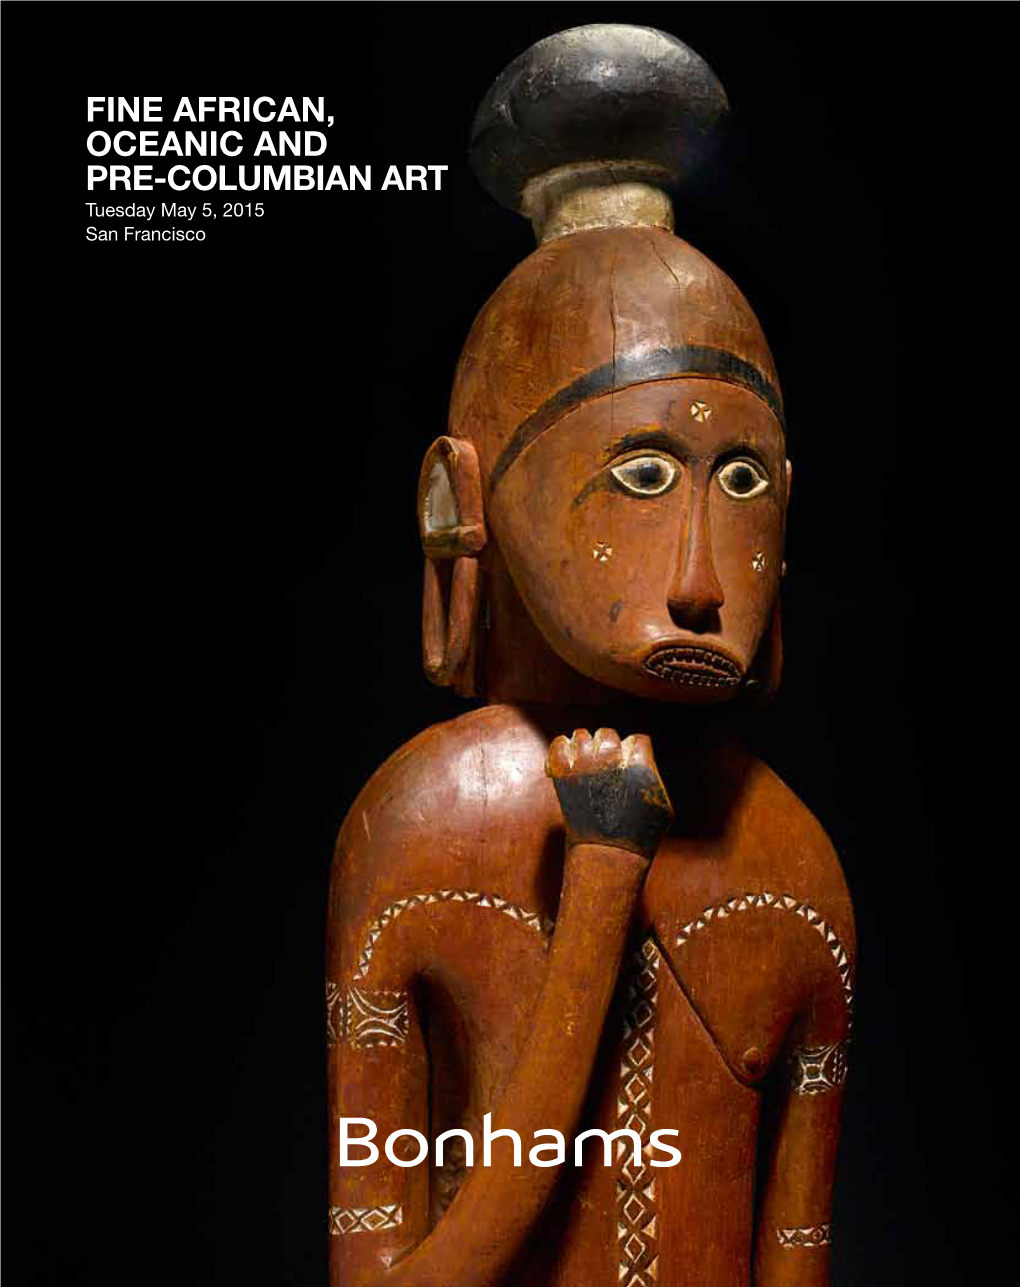 Fine African, Oceanic and Pre-Columbian Art Tuesday May 5, 2015 San Francisco